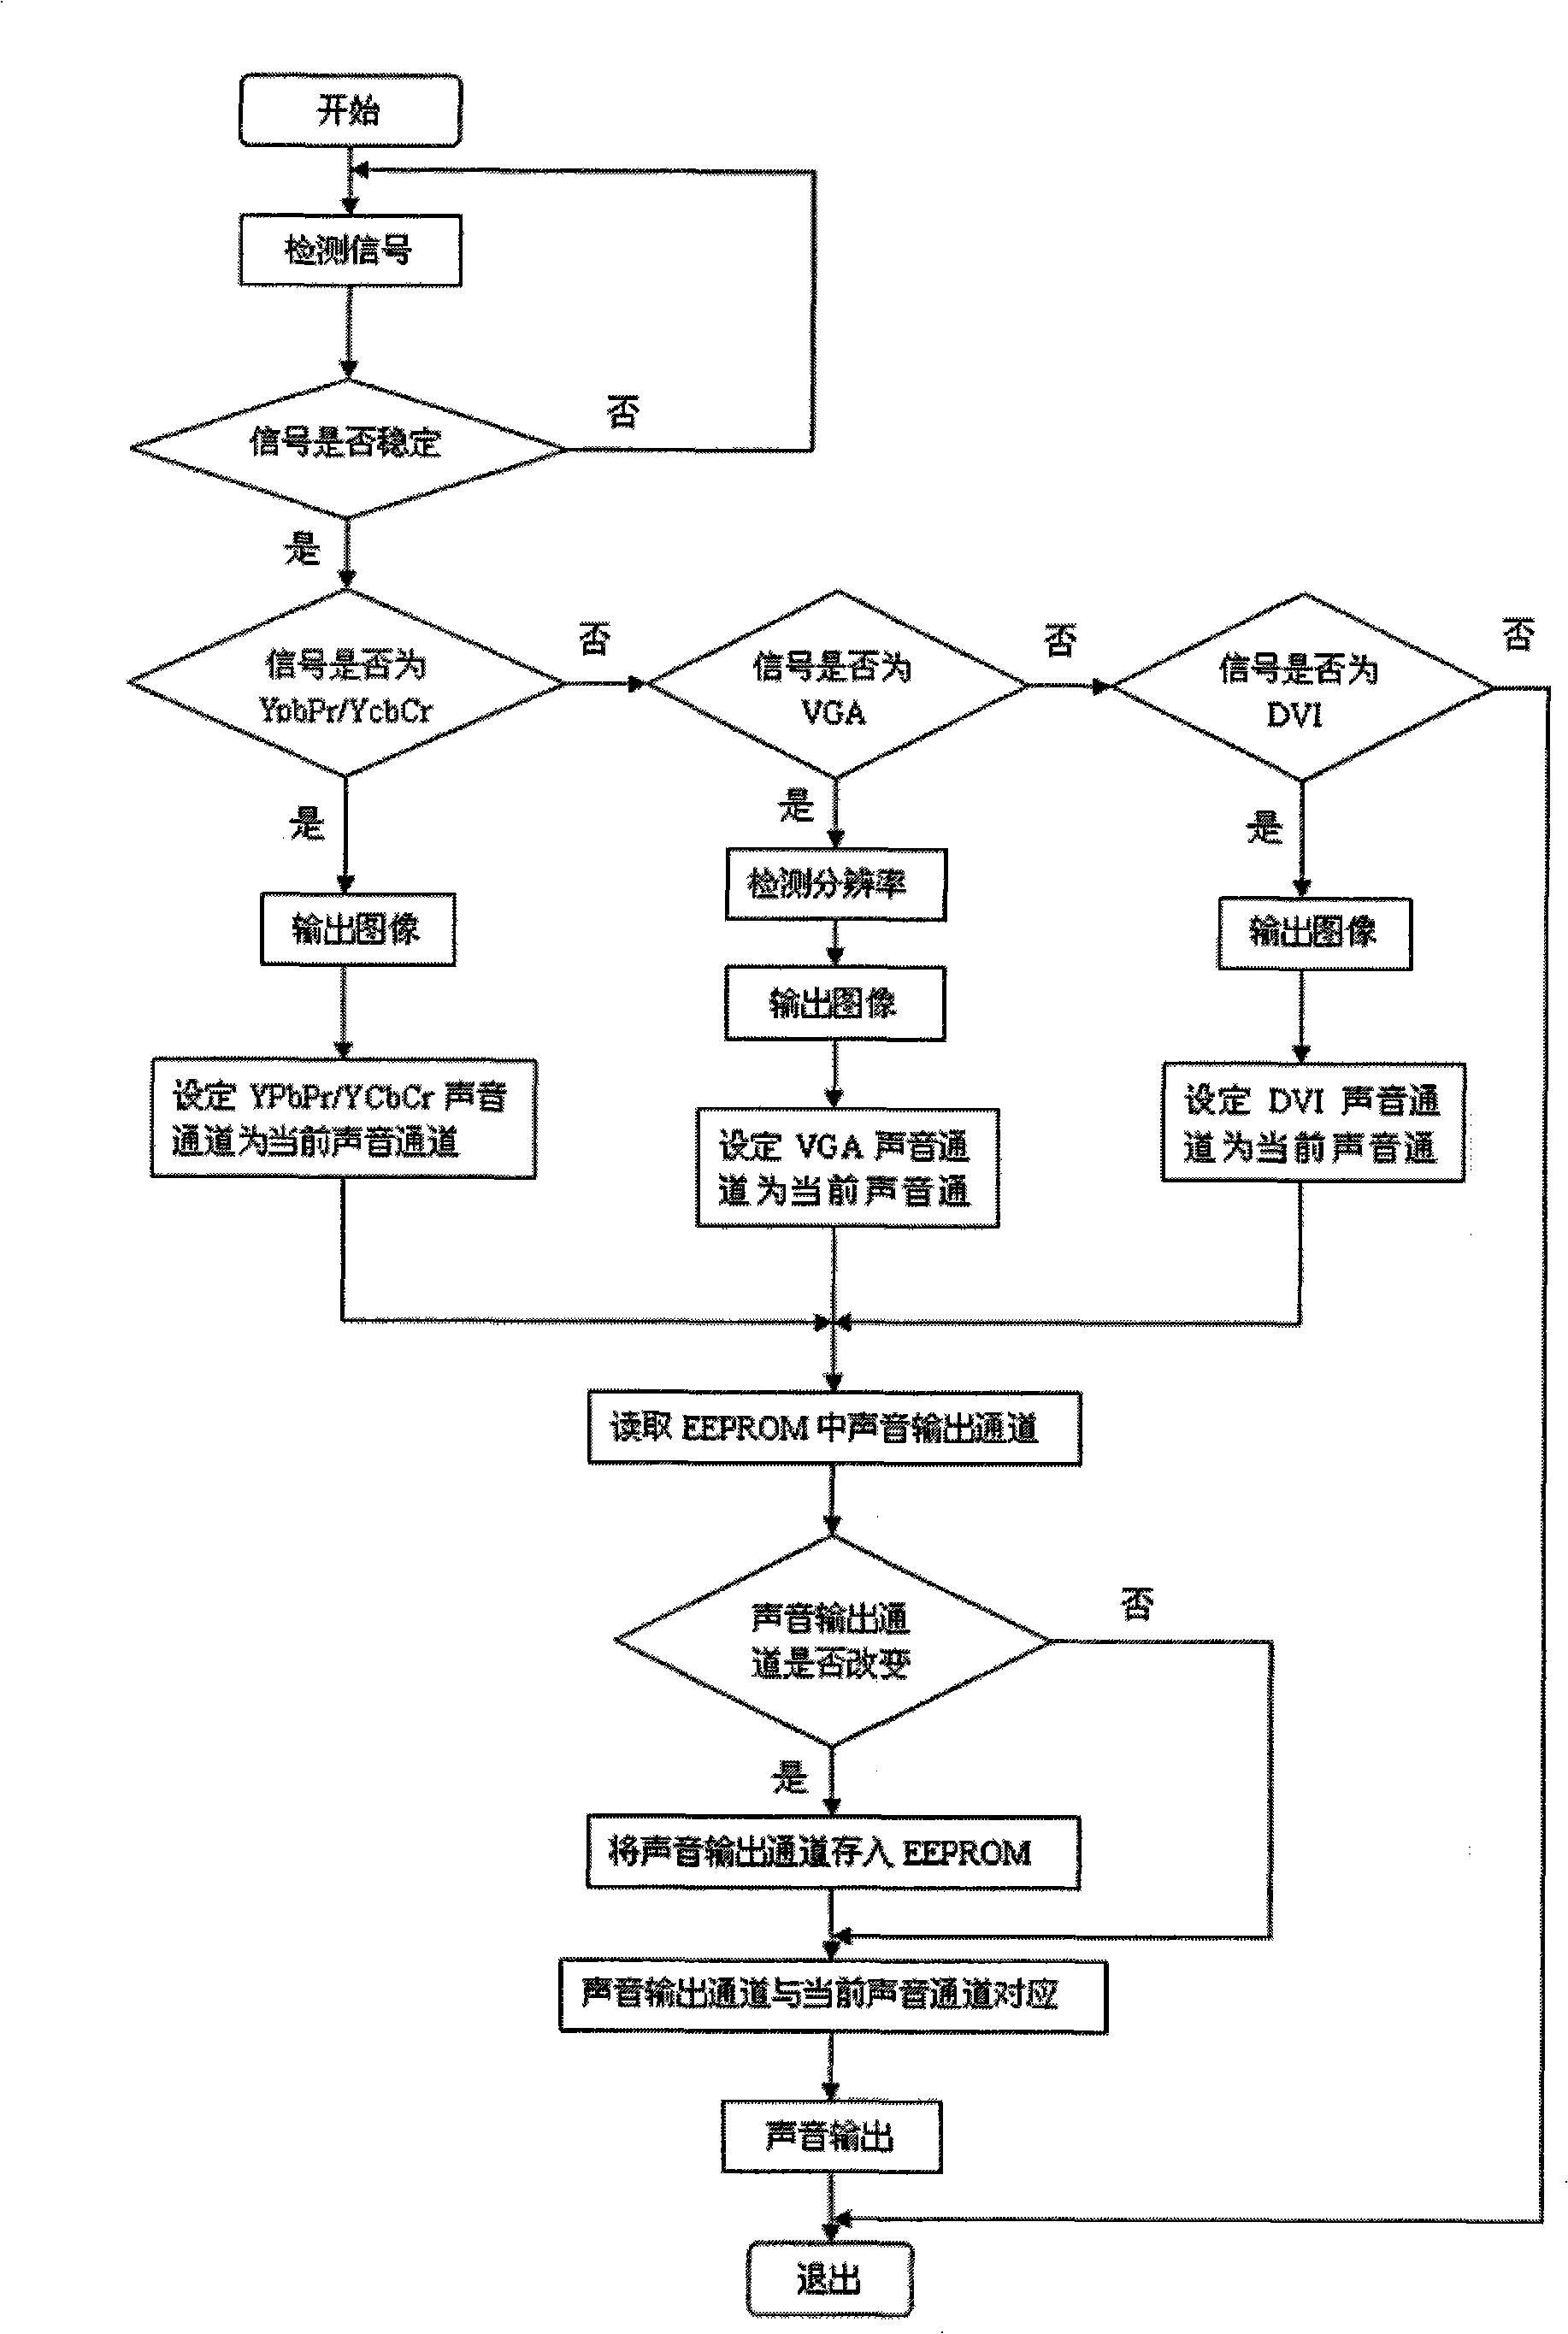 Method for selecting sound channel of television set